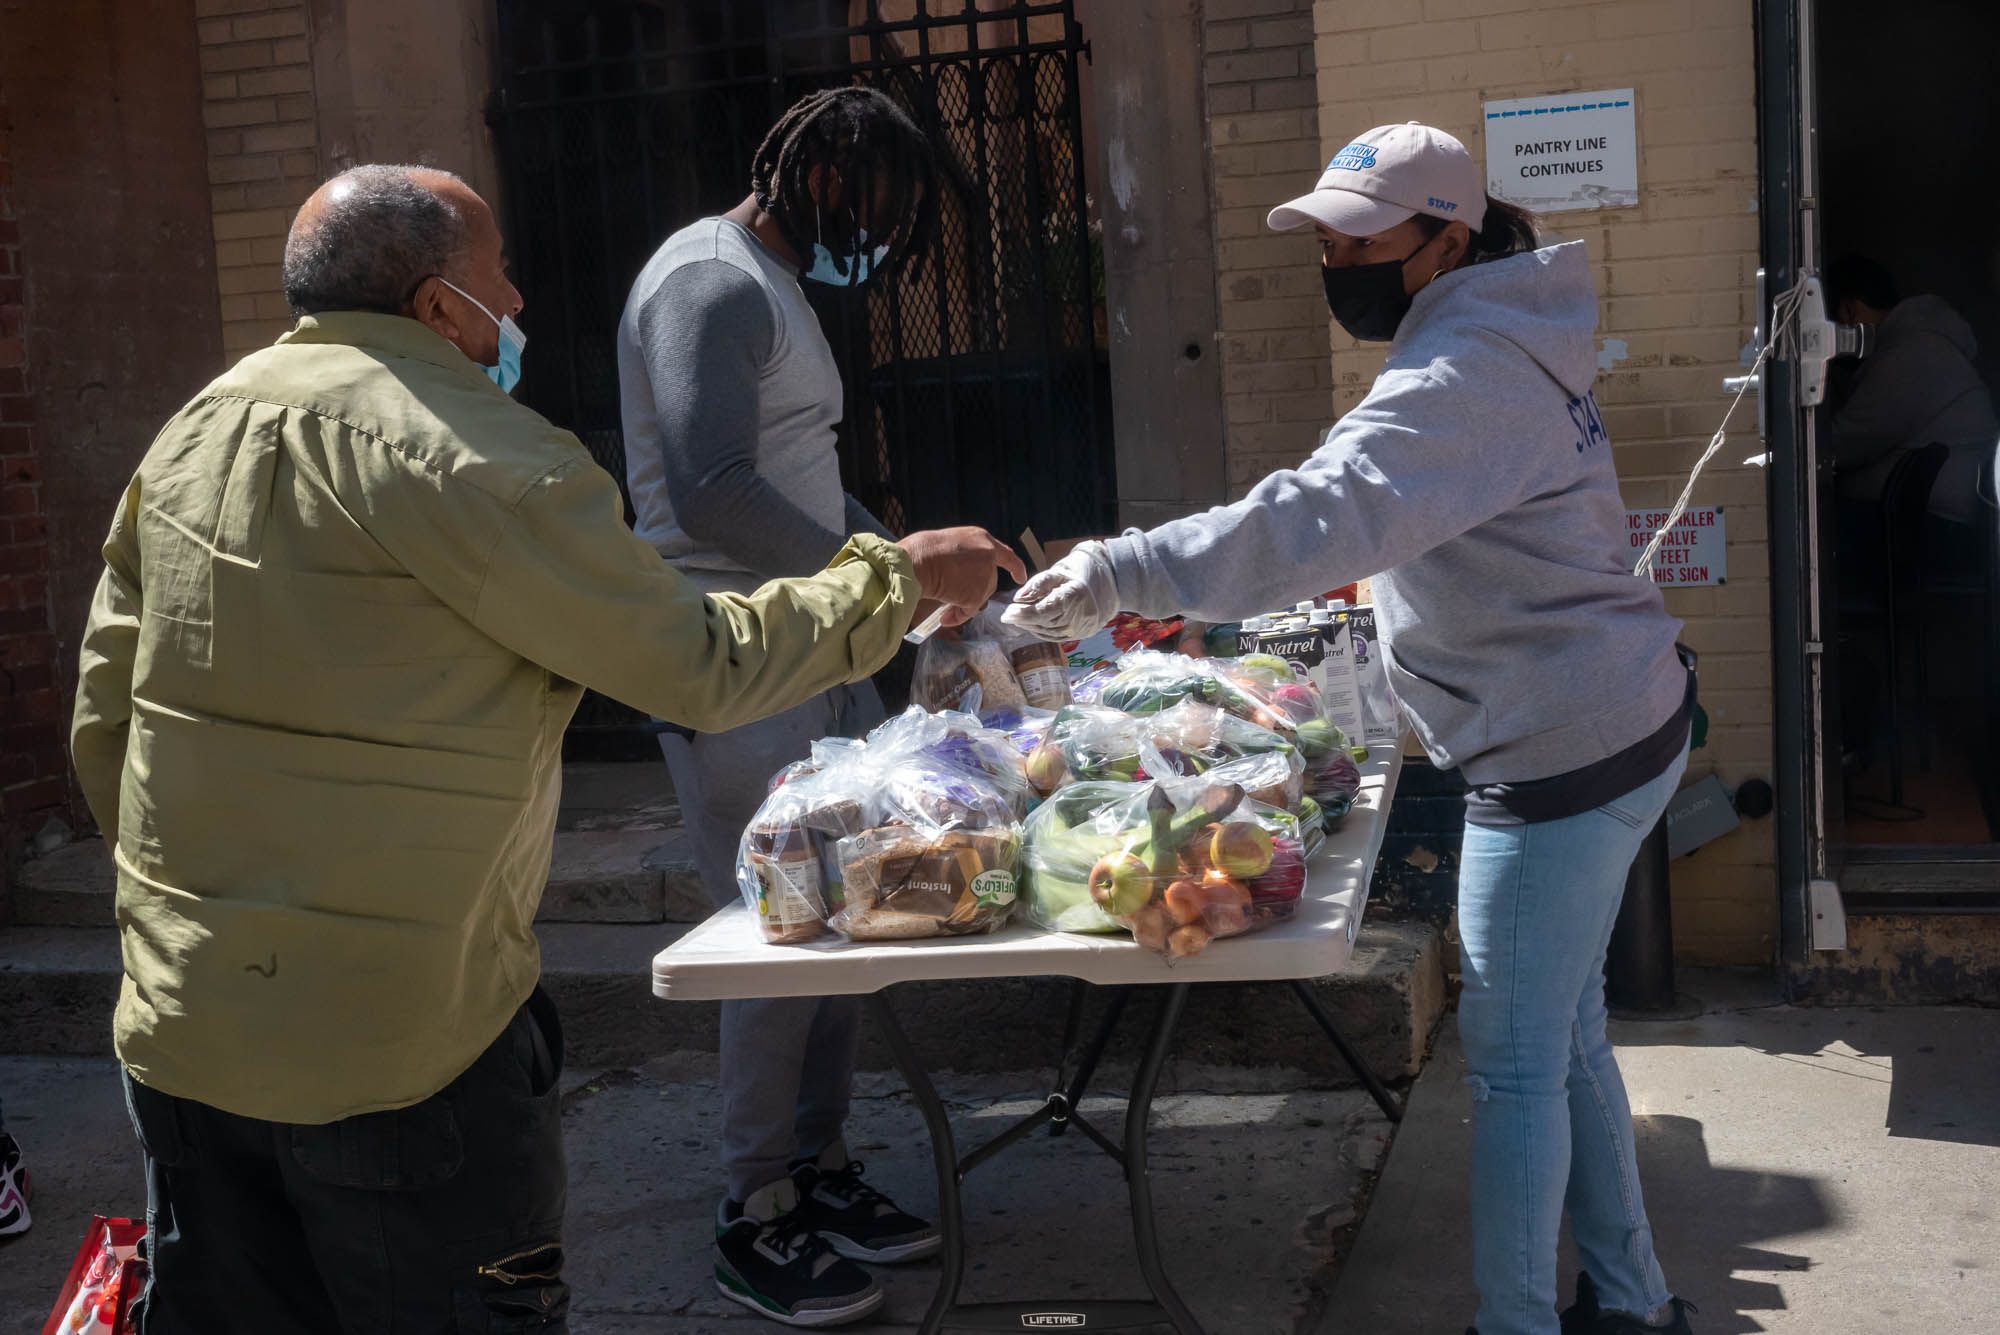 Pantry workers distribute food at a table outdoors.